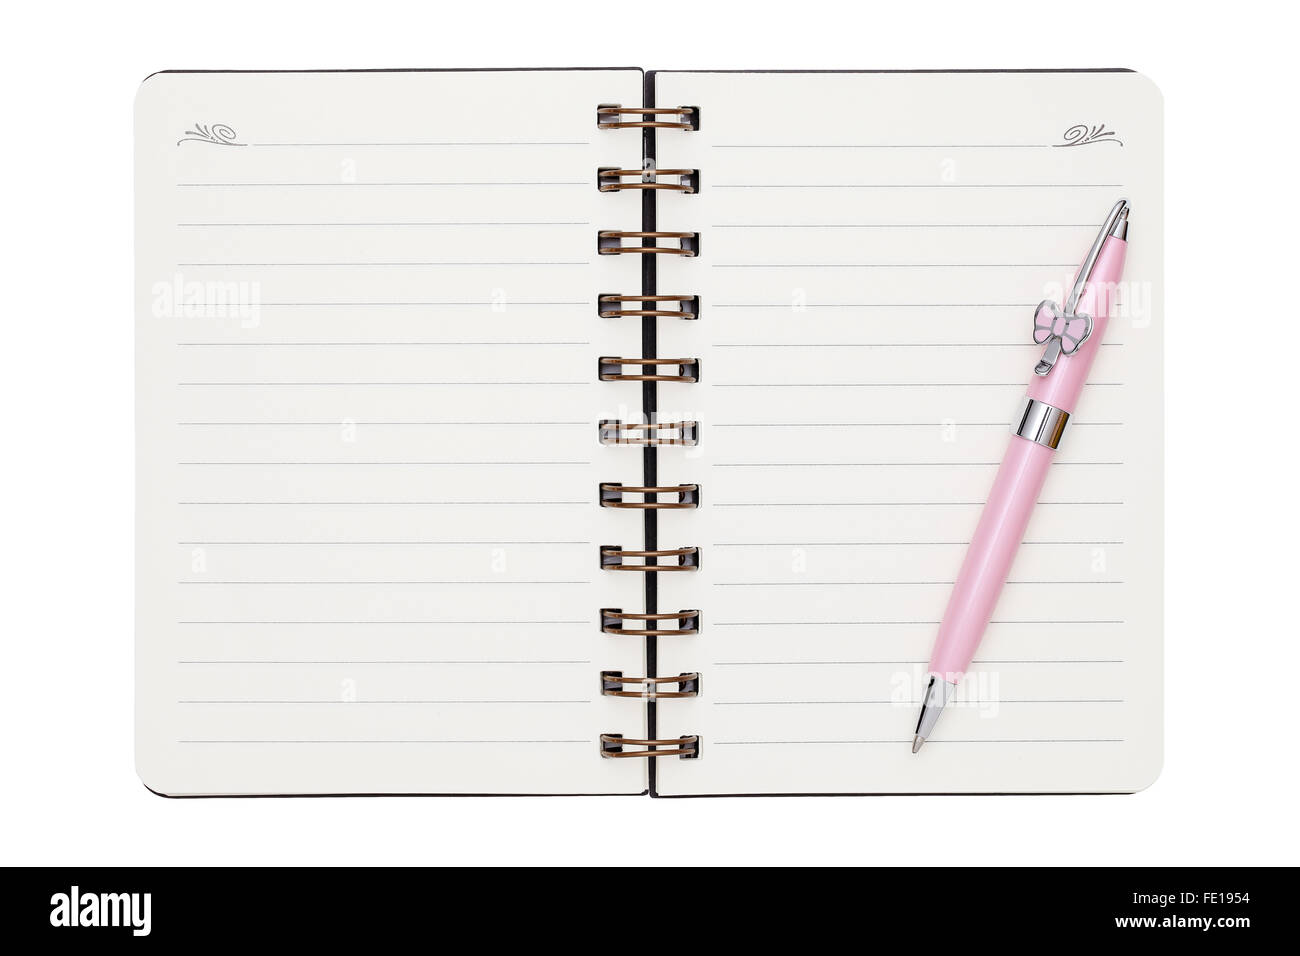 Blank spiral notebook with ball point pen isolated on white background Stock Photo